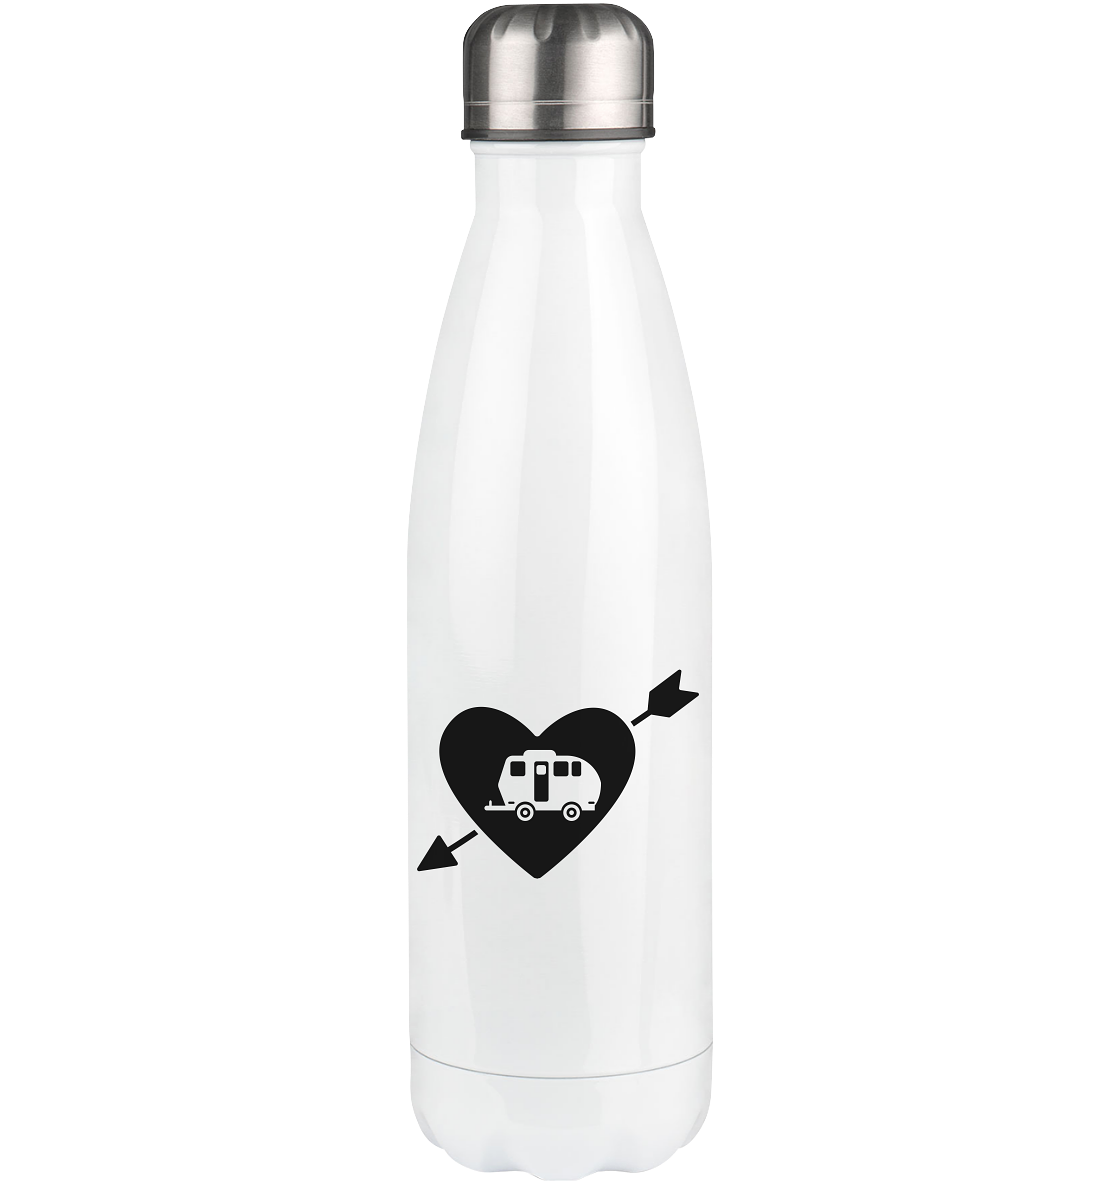 Arrow Heart and Camping 2 - Edelstahl Thermosflasche camping UONP 500ml